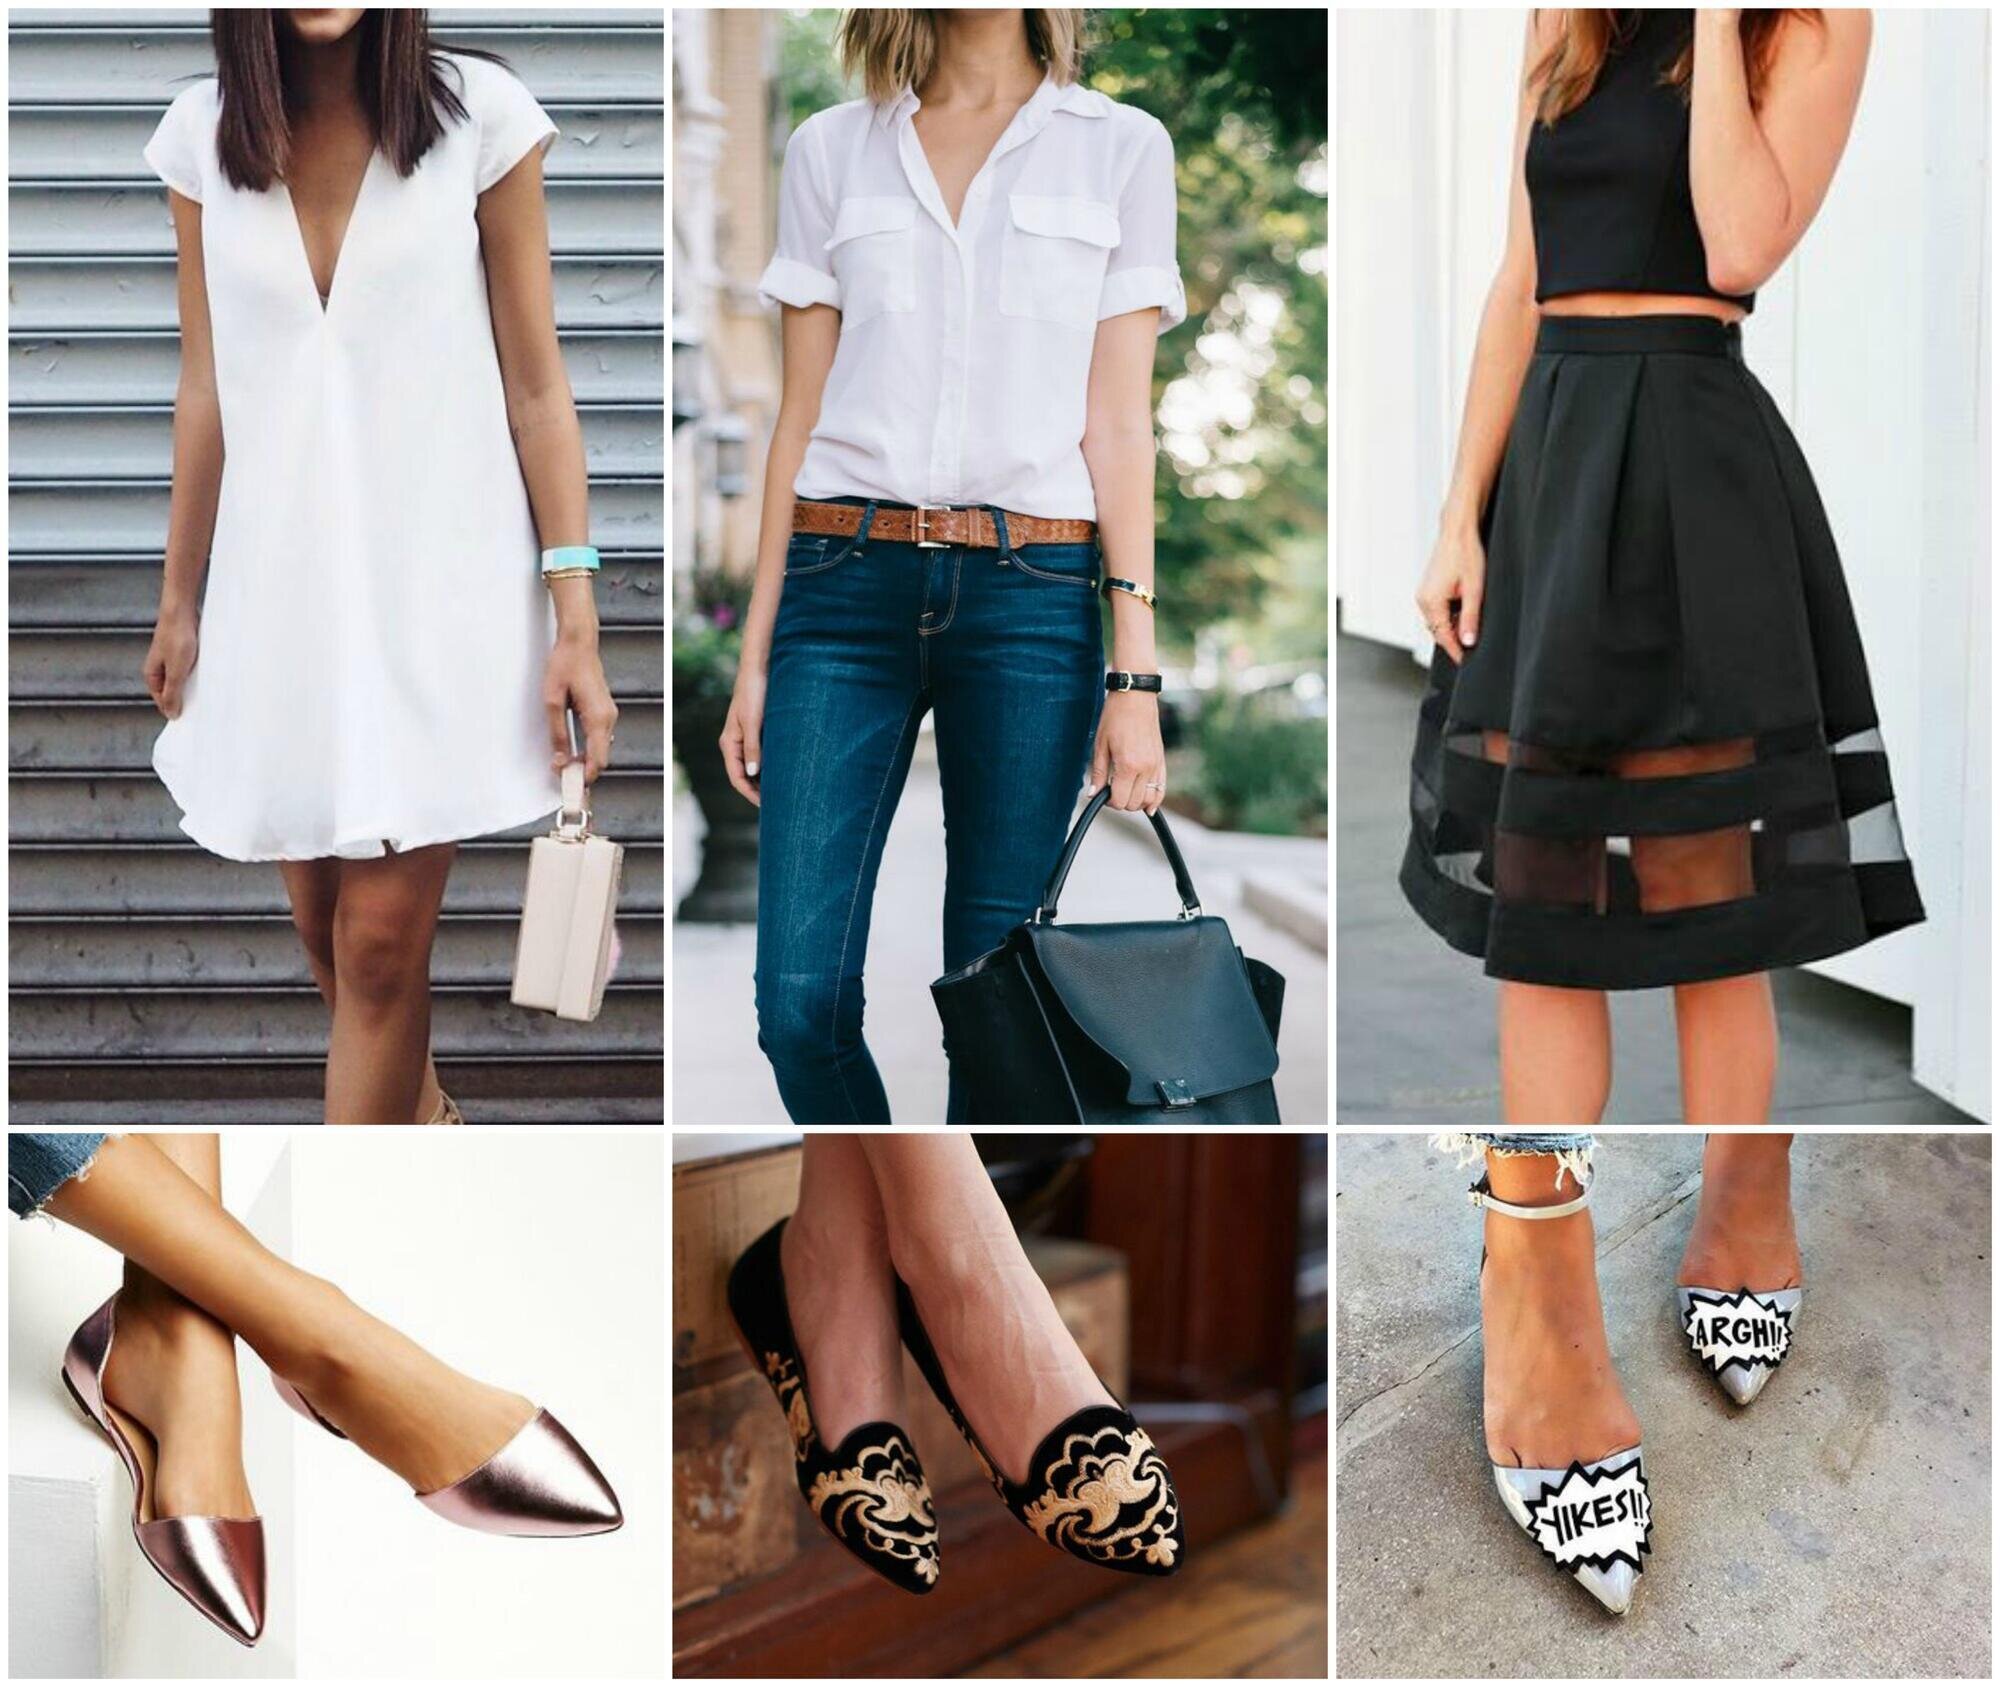 A Wedding Outfit Without Heels! - Style Guile